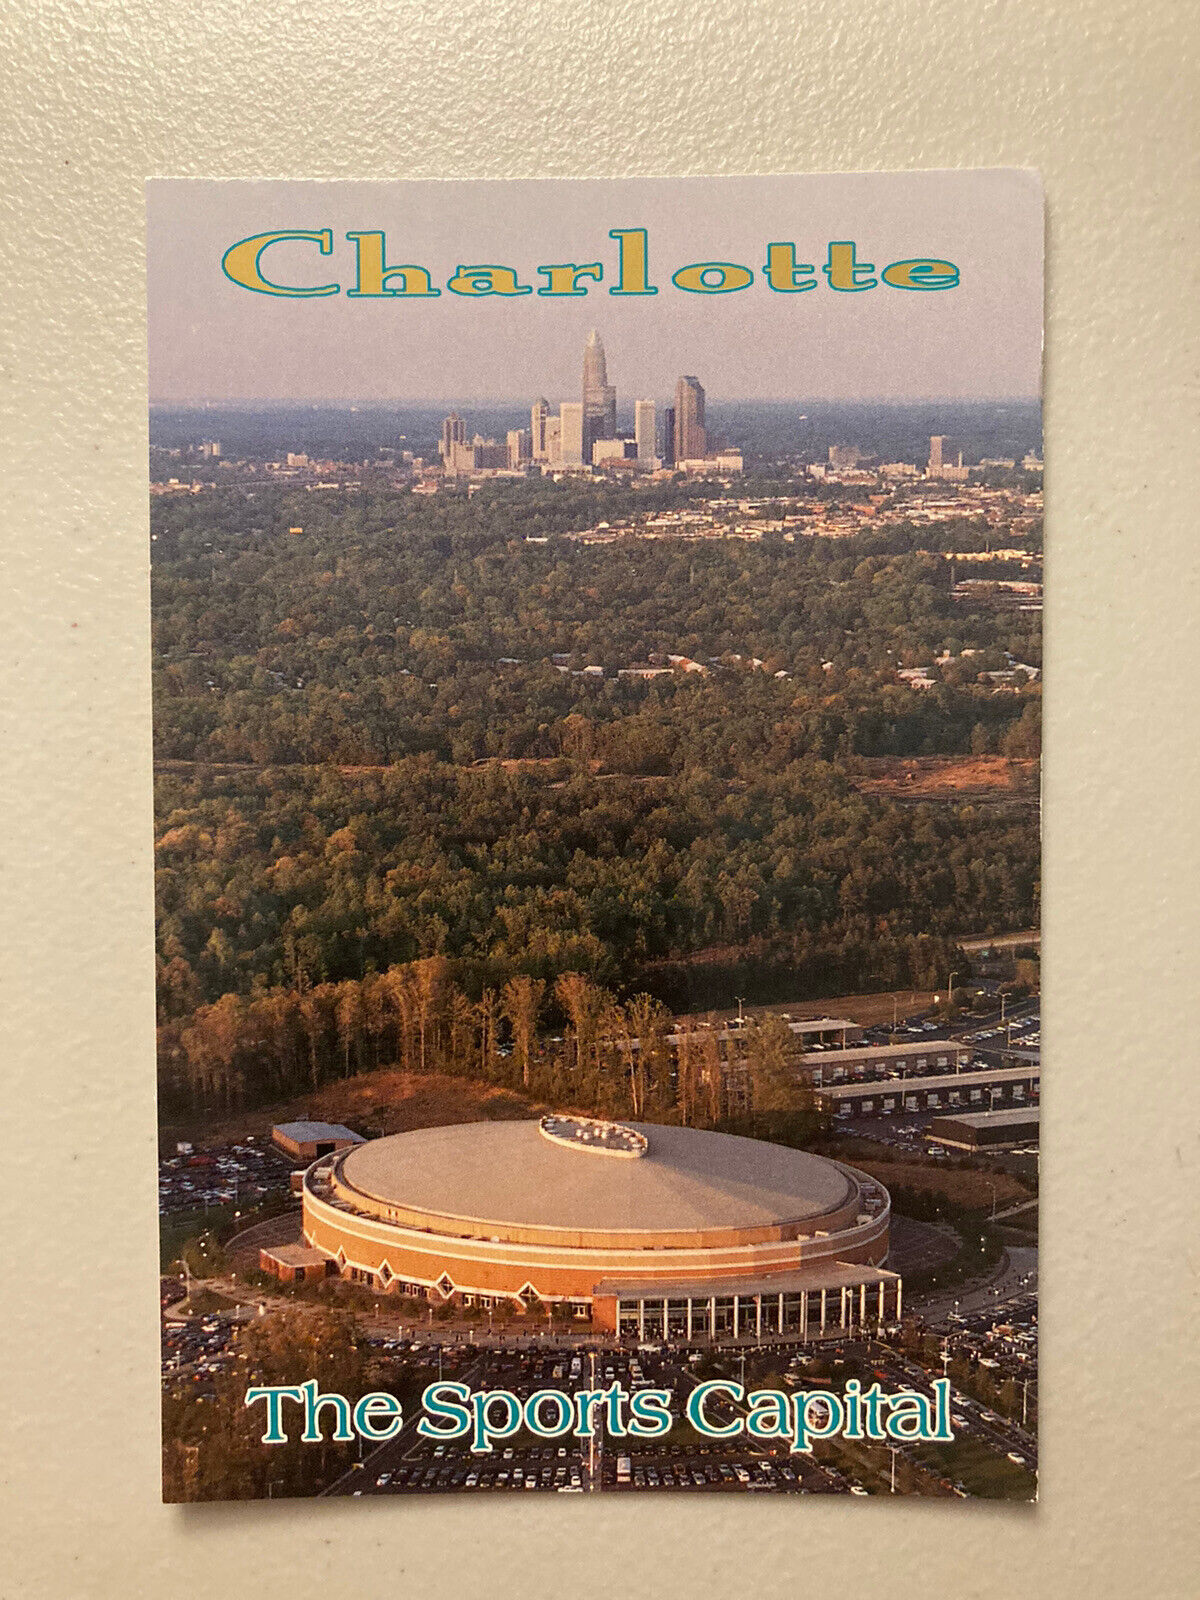 Vintage Charlotte Coliseum “The Hive” former home of the Charlotte Hornets